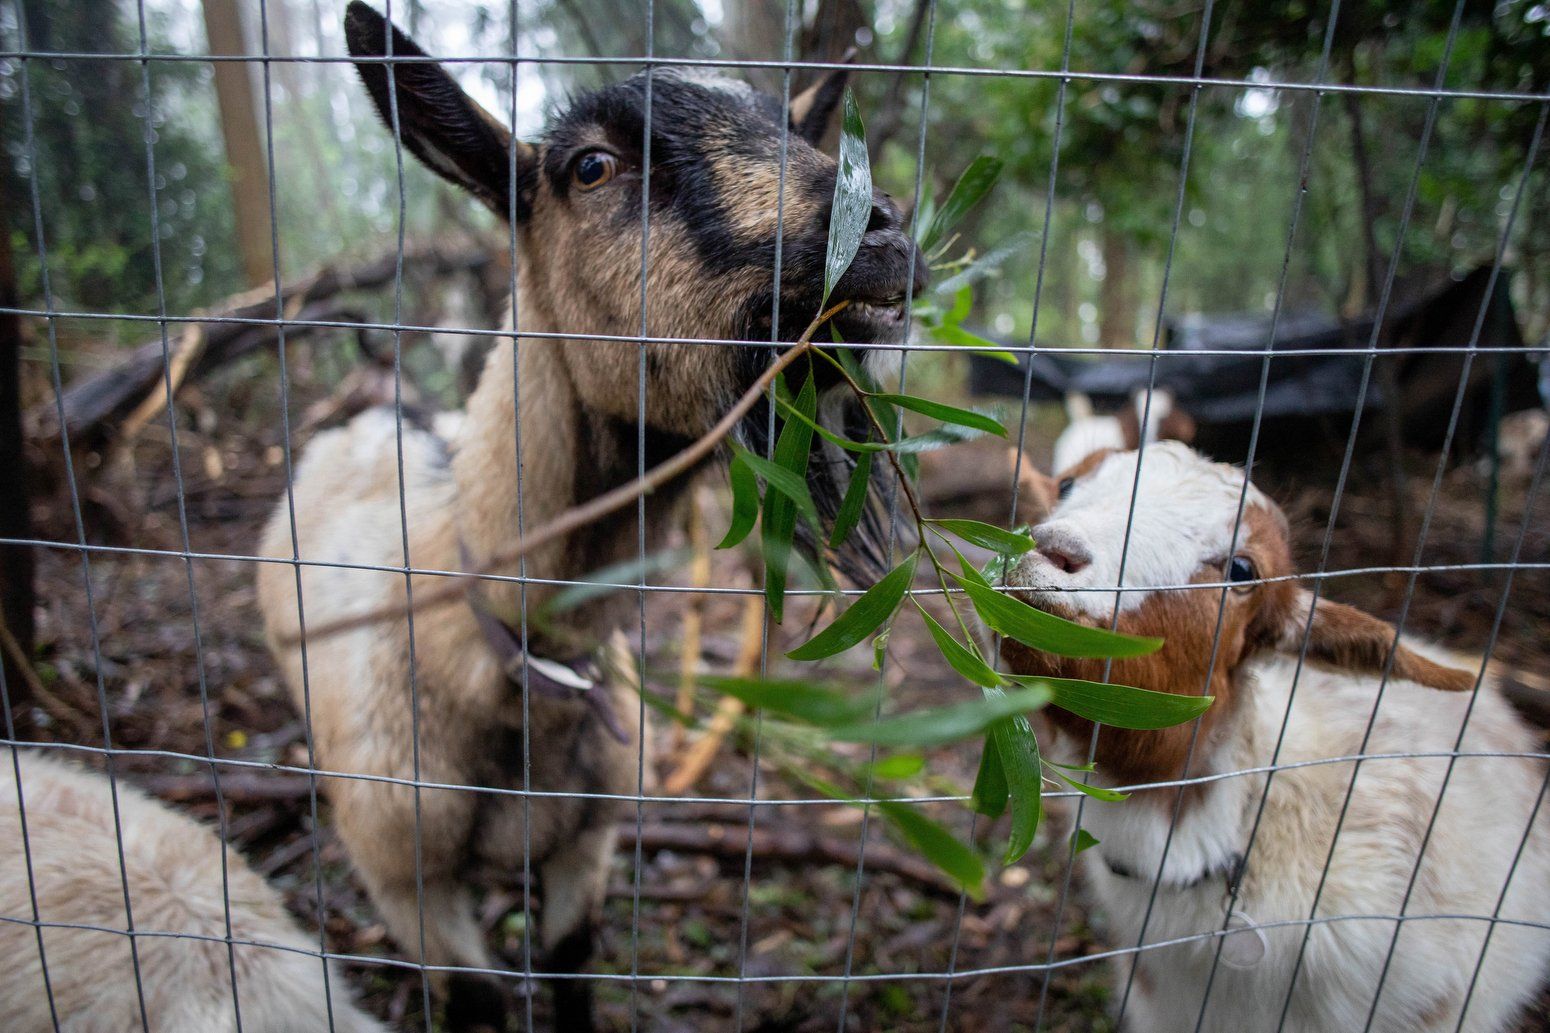 Two goats eating leaves behind a wire fence